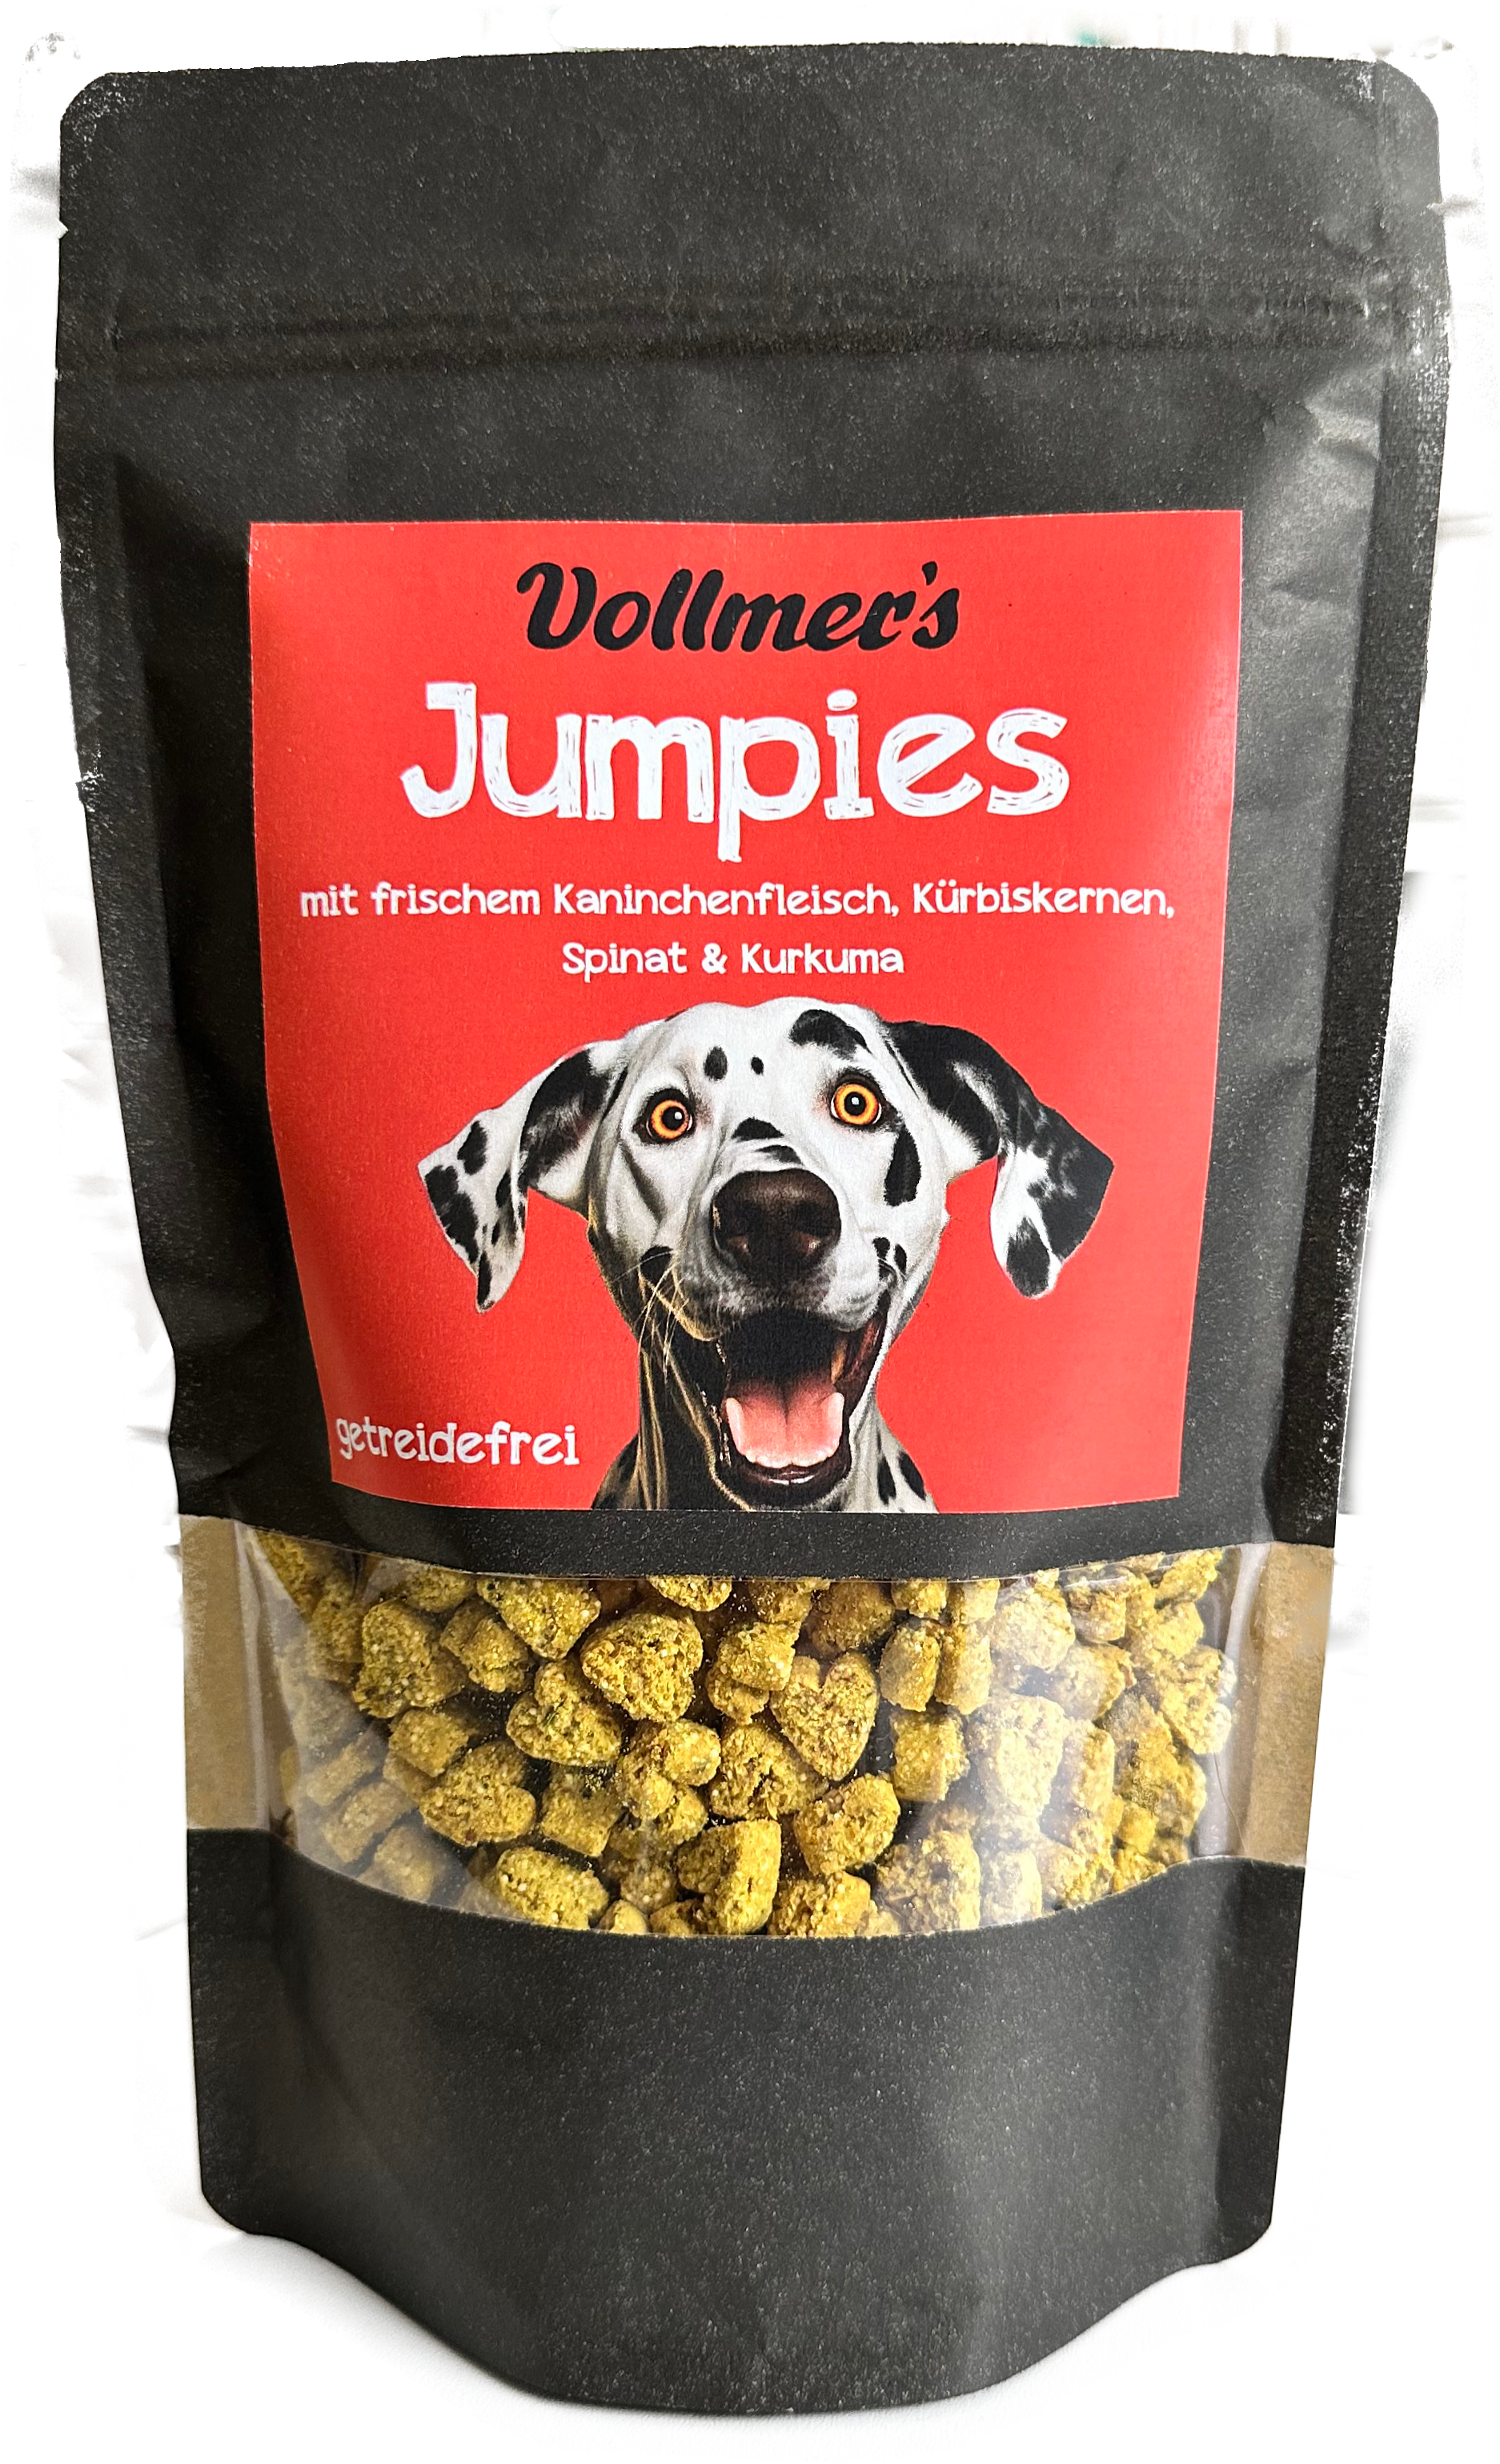 300g Vollmers Jumpies 